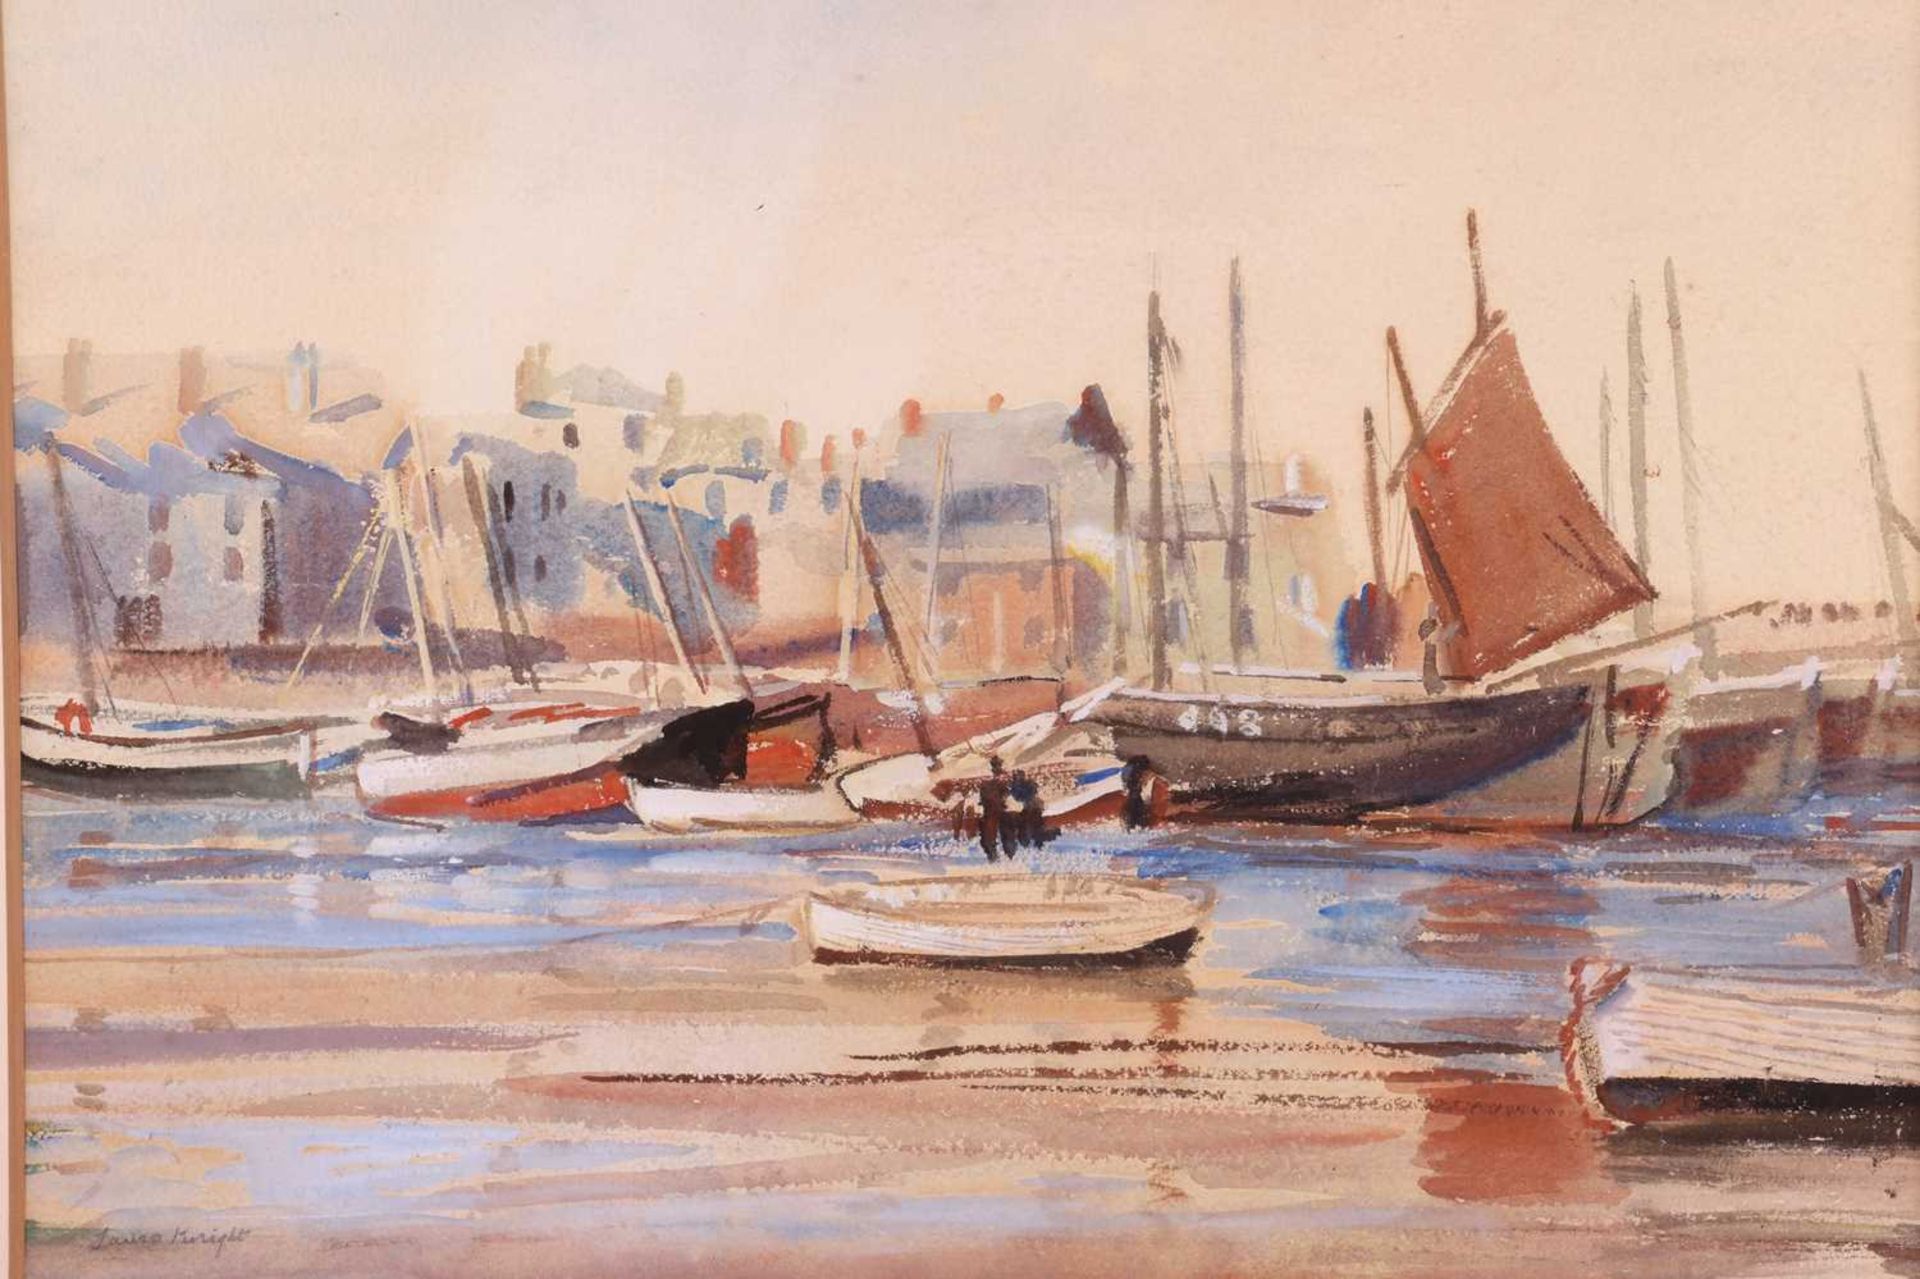 Dame Laura Knight (1877 - 1979), 'No. 1 Fishing Boats' - a harbour scene, signed Laura Knight in pen - Image 3 of 7